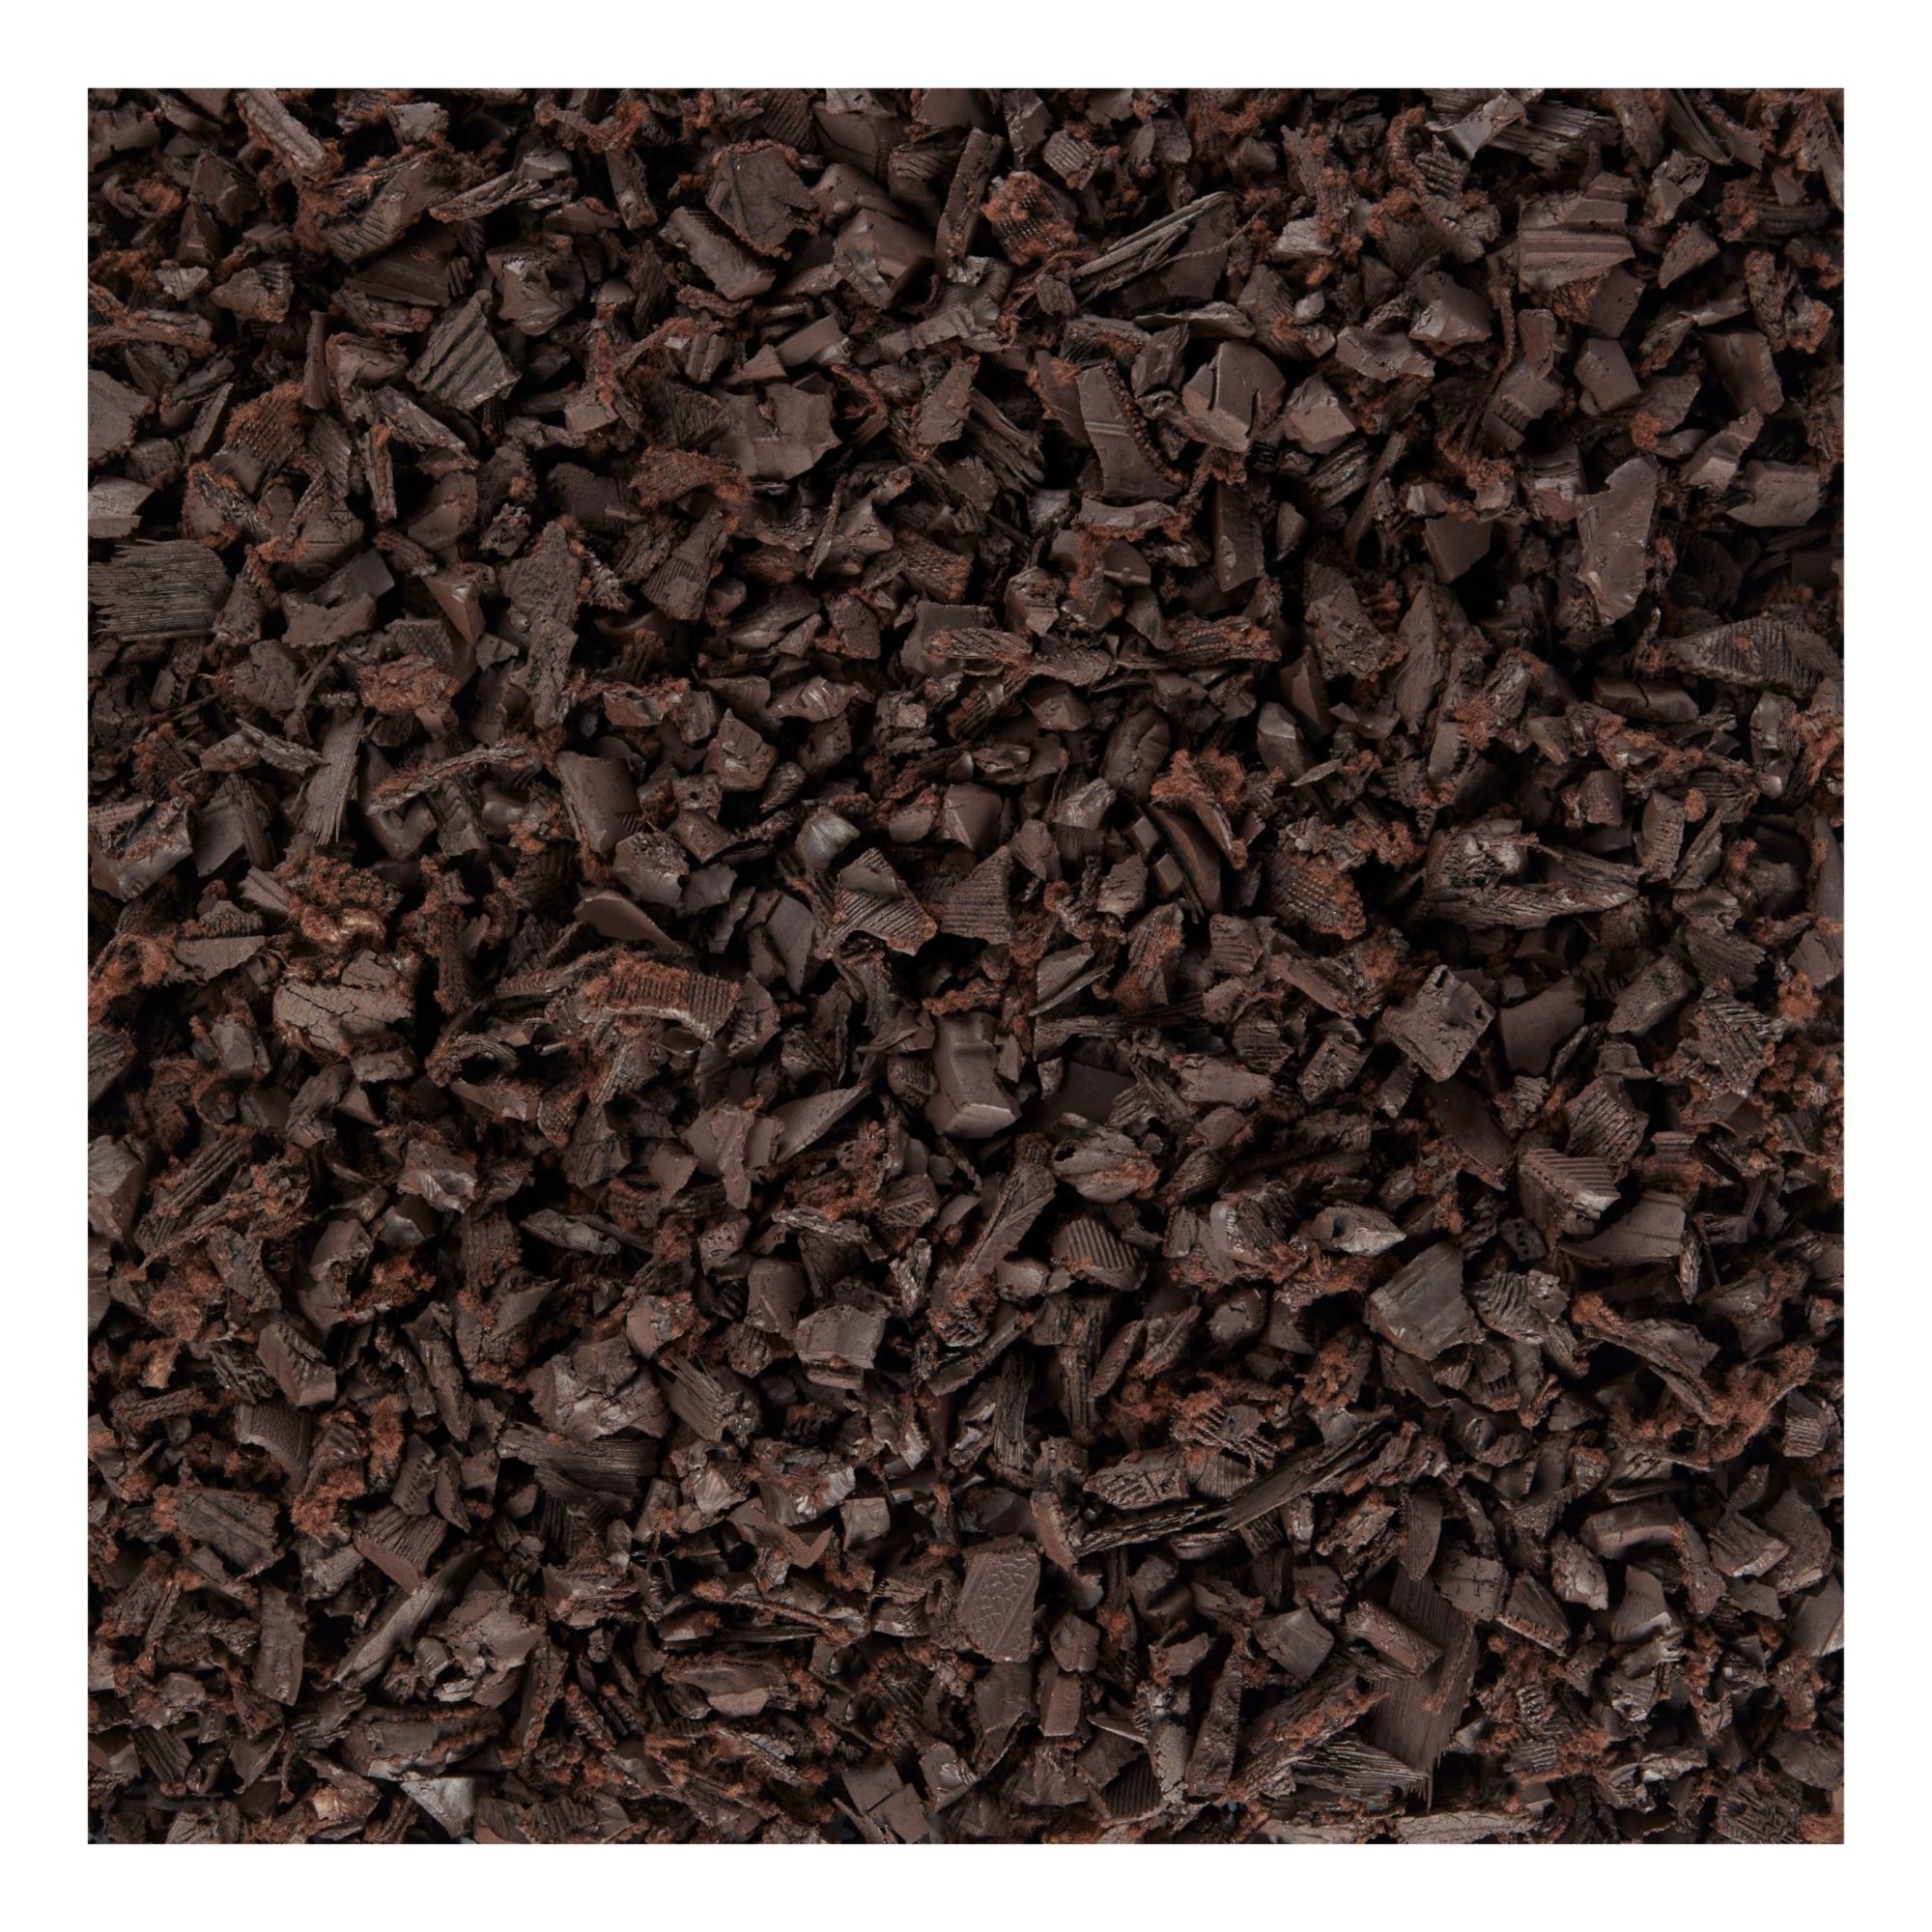 GroundSmart Rubber Mulch 50 Bags, Brown